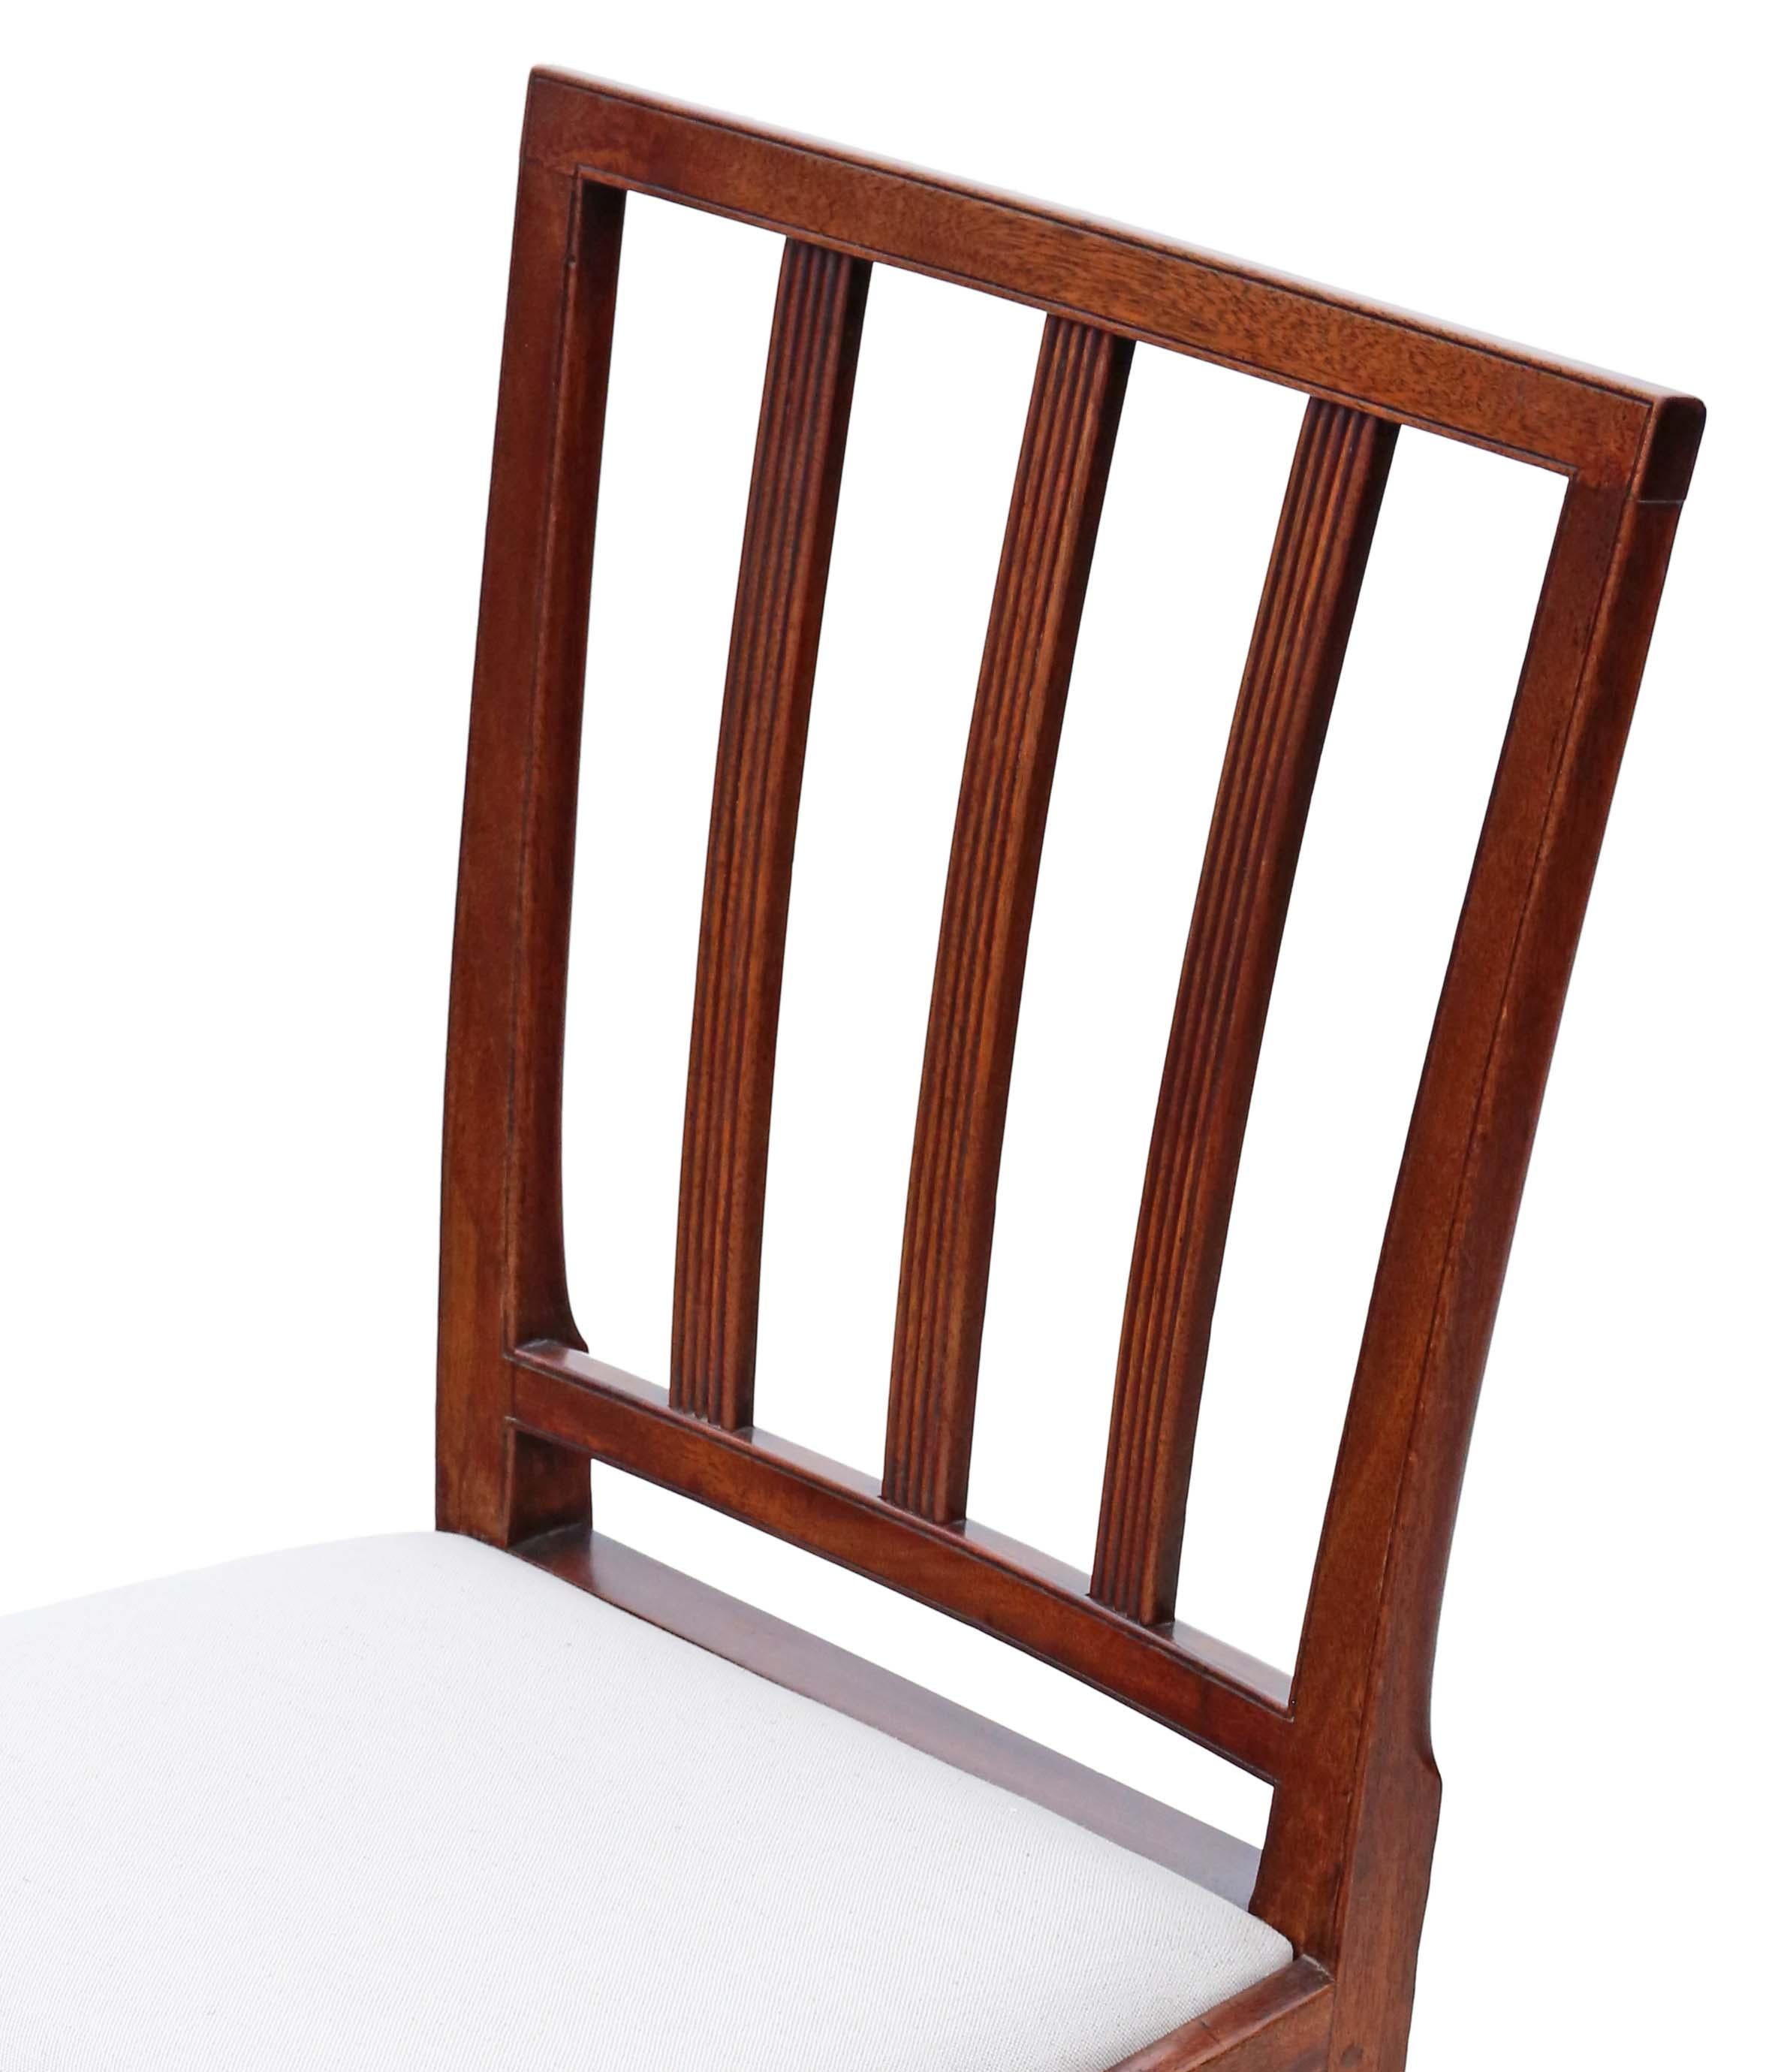 Regency Mahogany Dining Chairs: Set of 8 (6+2), Antique Quality, Early 19th C For Sale 3